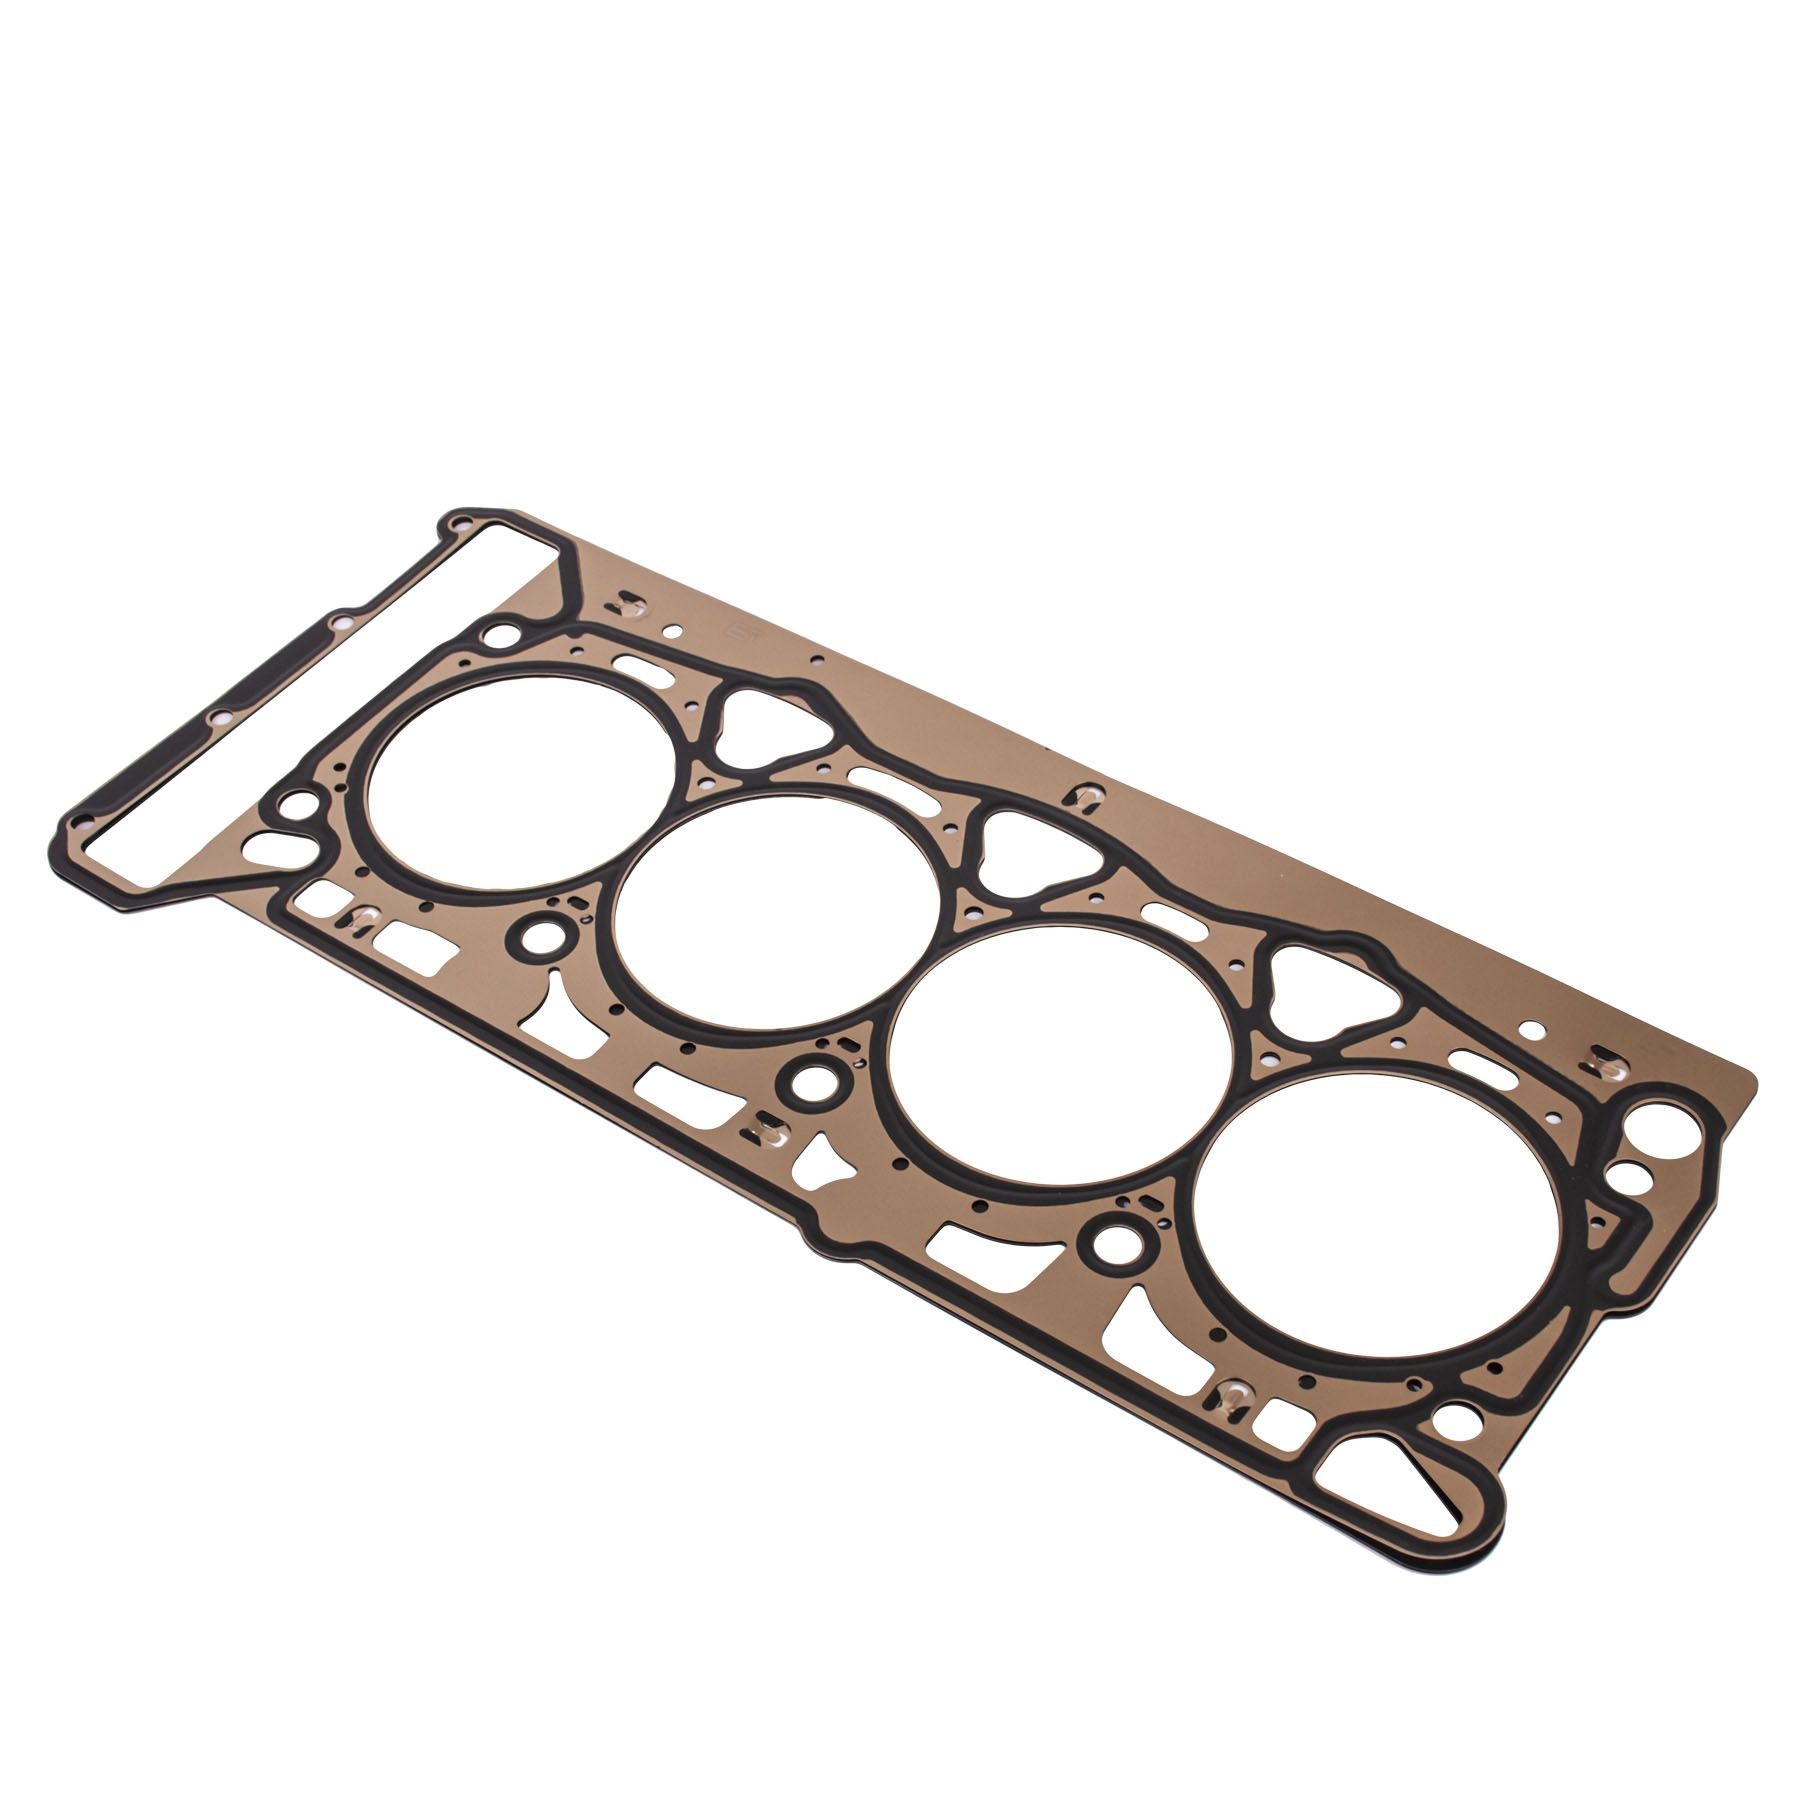 TS0060 Engine gasket kit ET ENGINETEAM TS0060 review and test